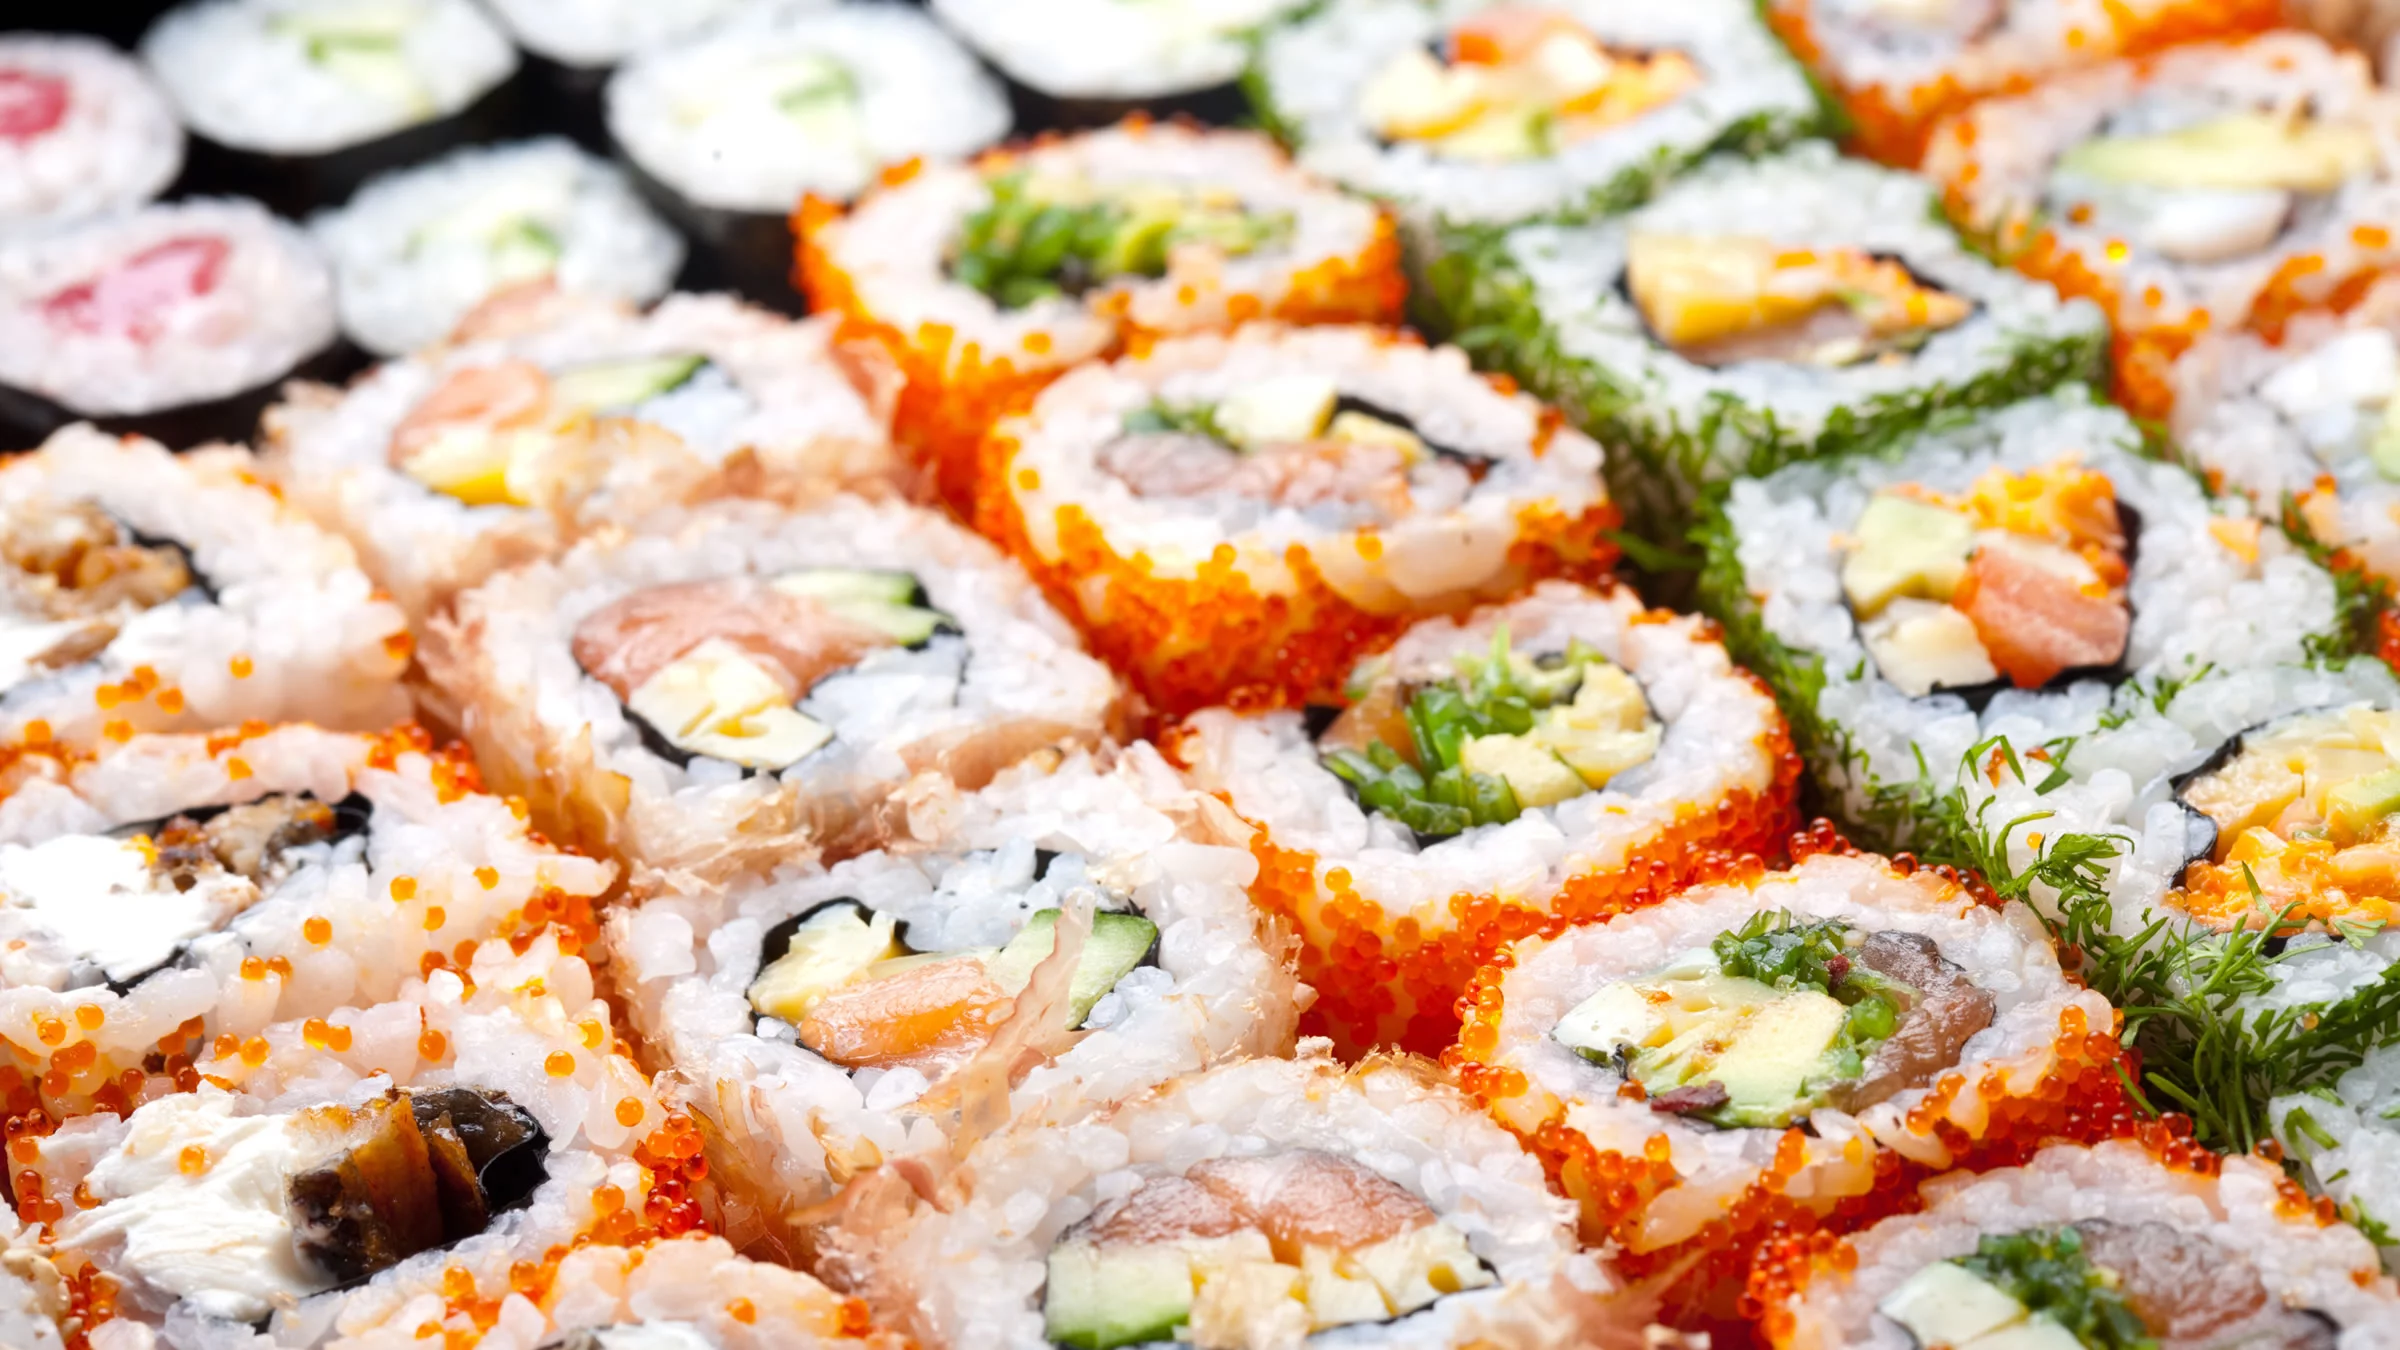 Styles and varieties of sushi